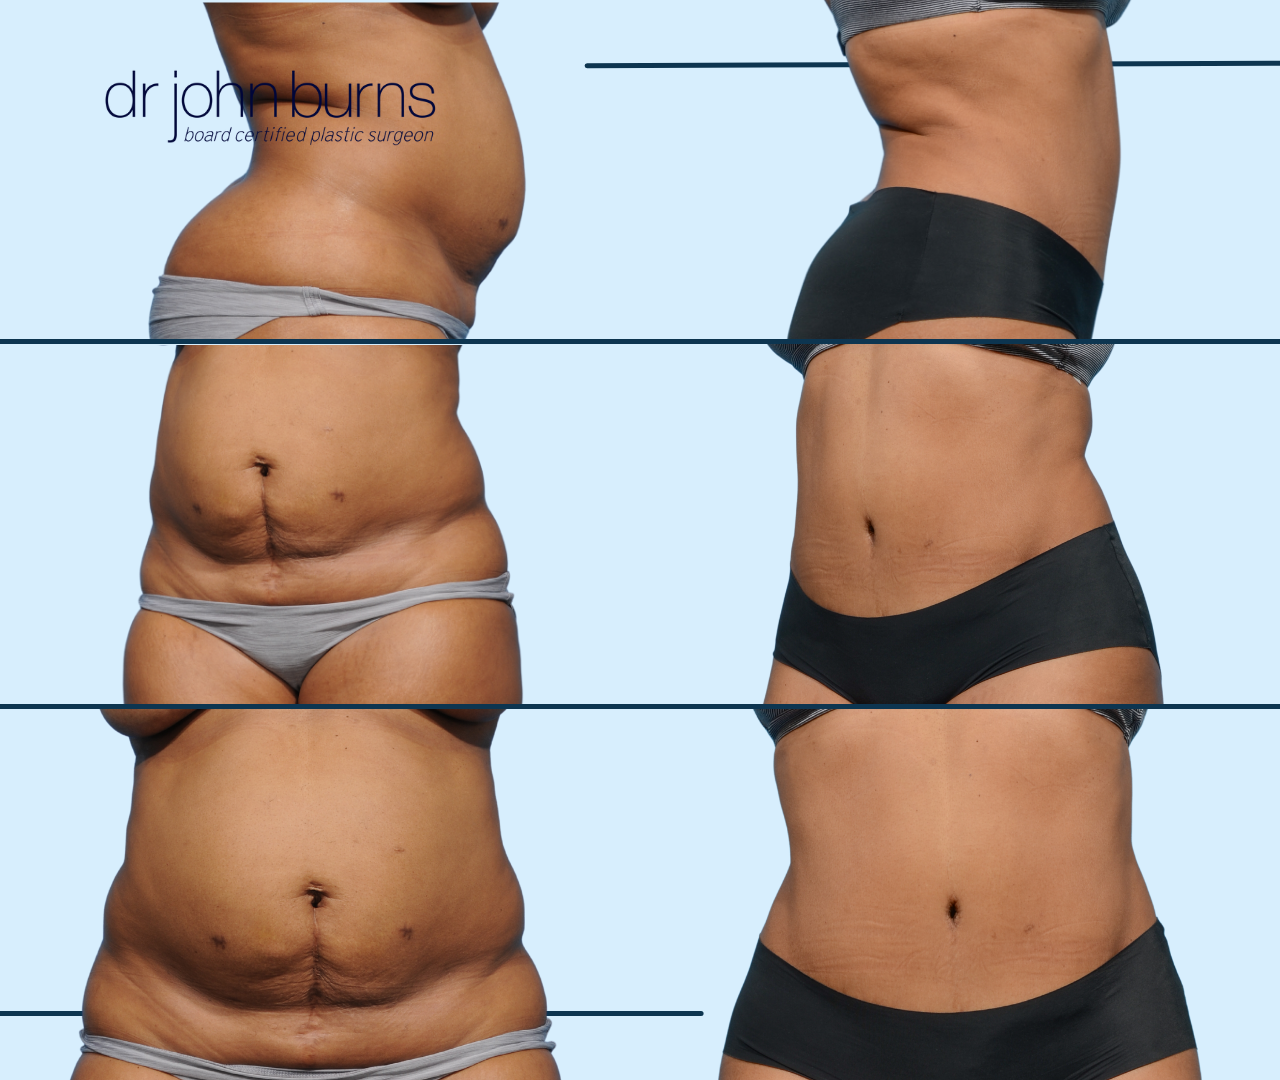 Before & After Hourglass Tummy Tuck by Dallas Plastic Surgeon, Dr. John Burns